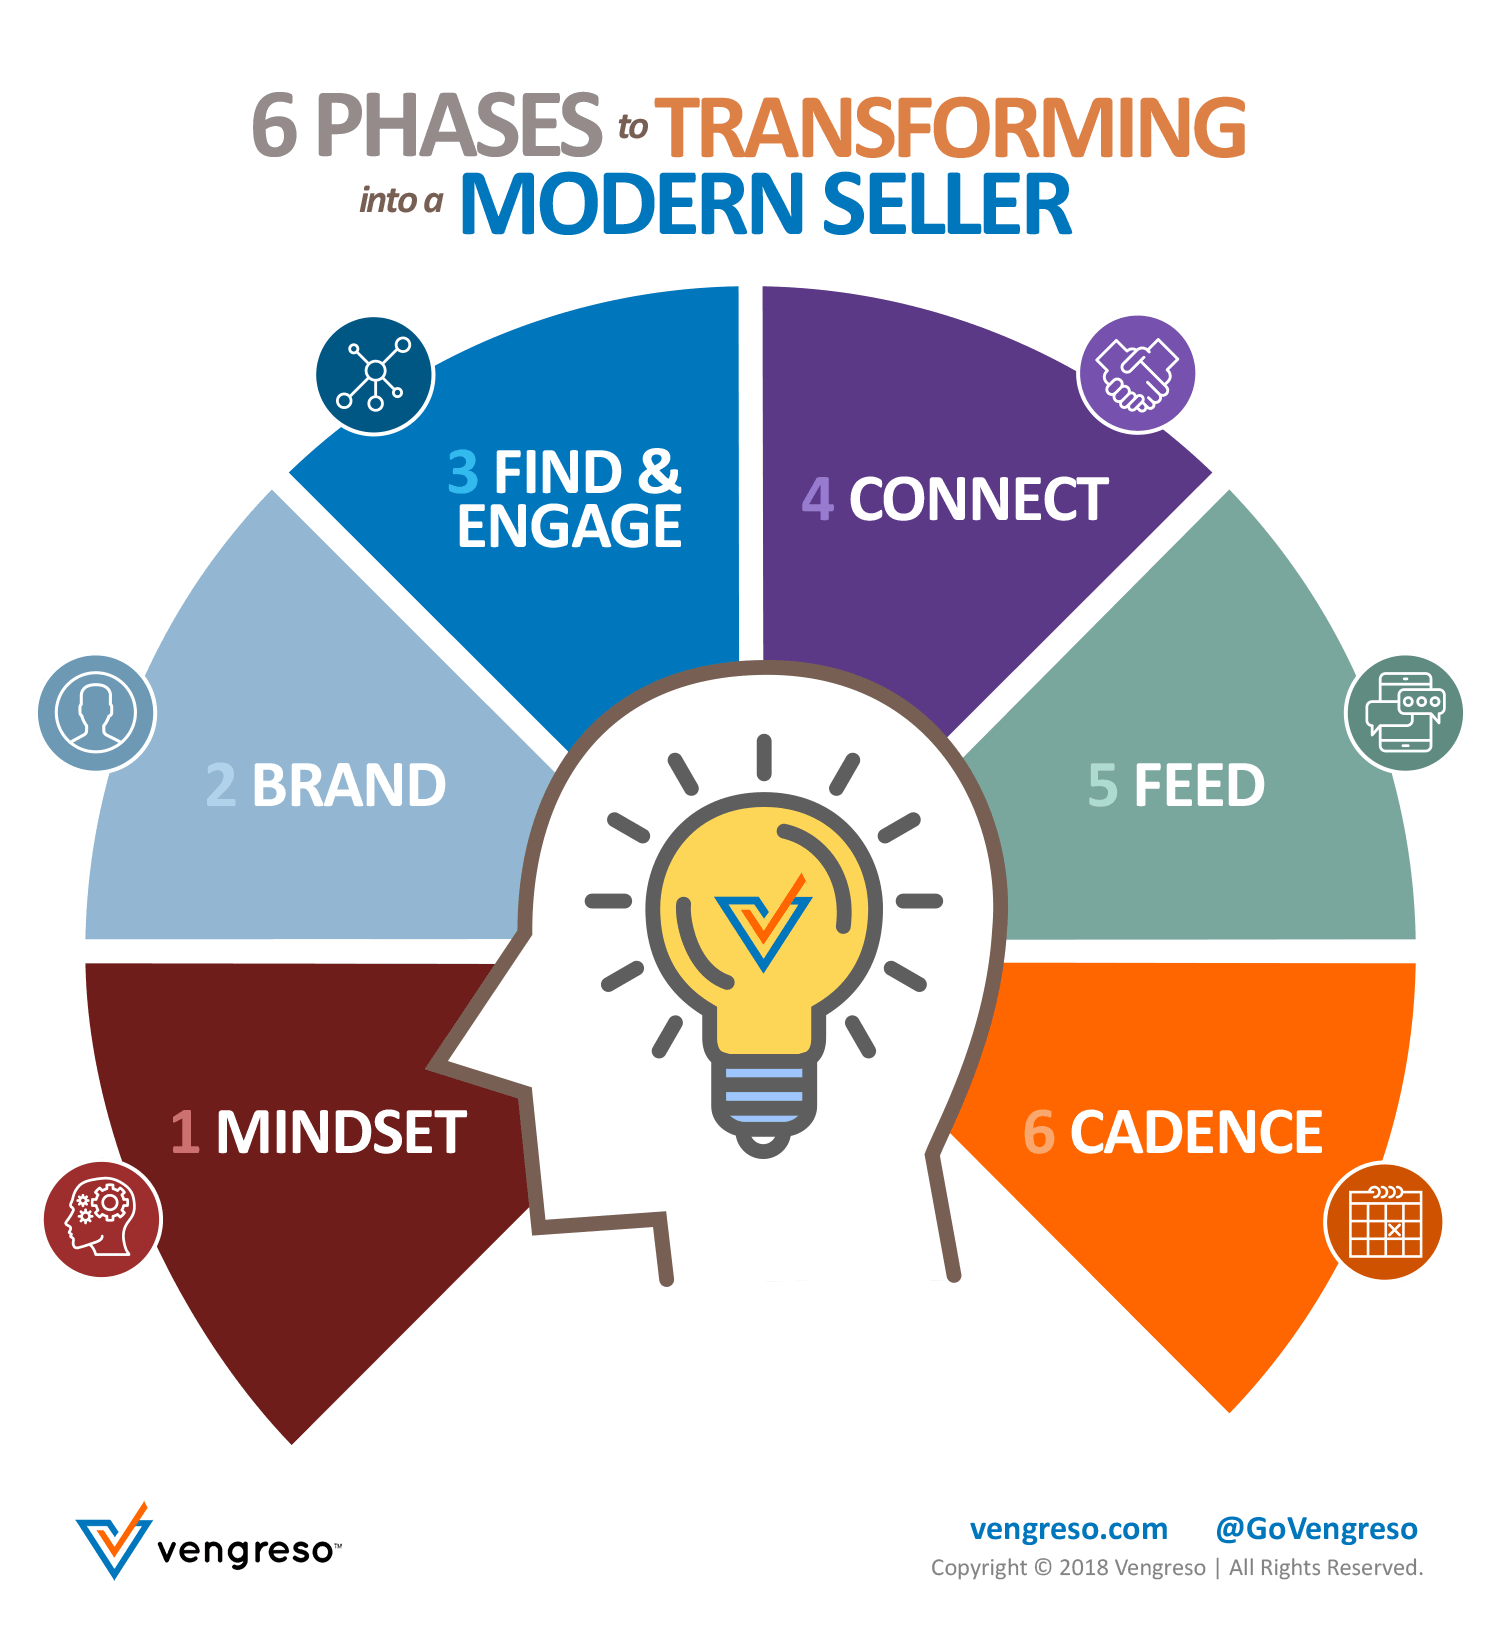 Benchmarking and assessment that guide the transformation of modern sellers through 6 phases.